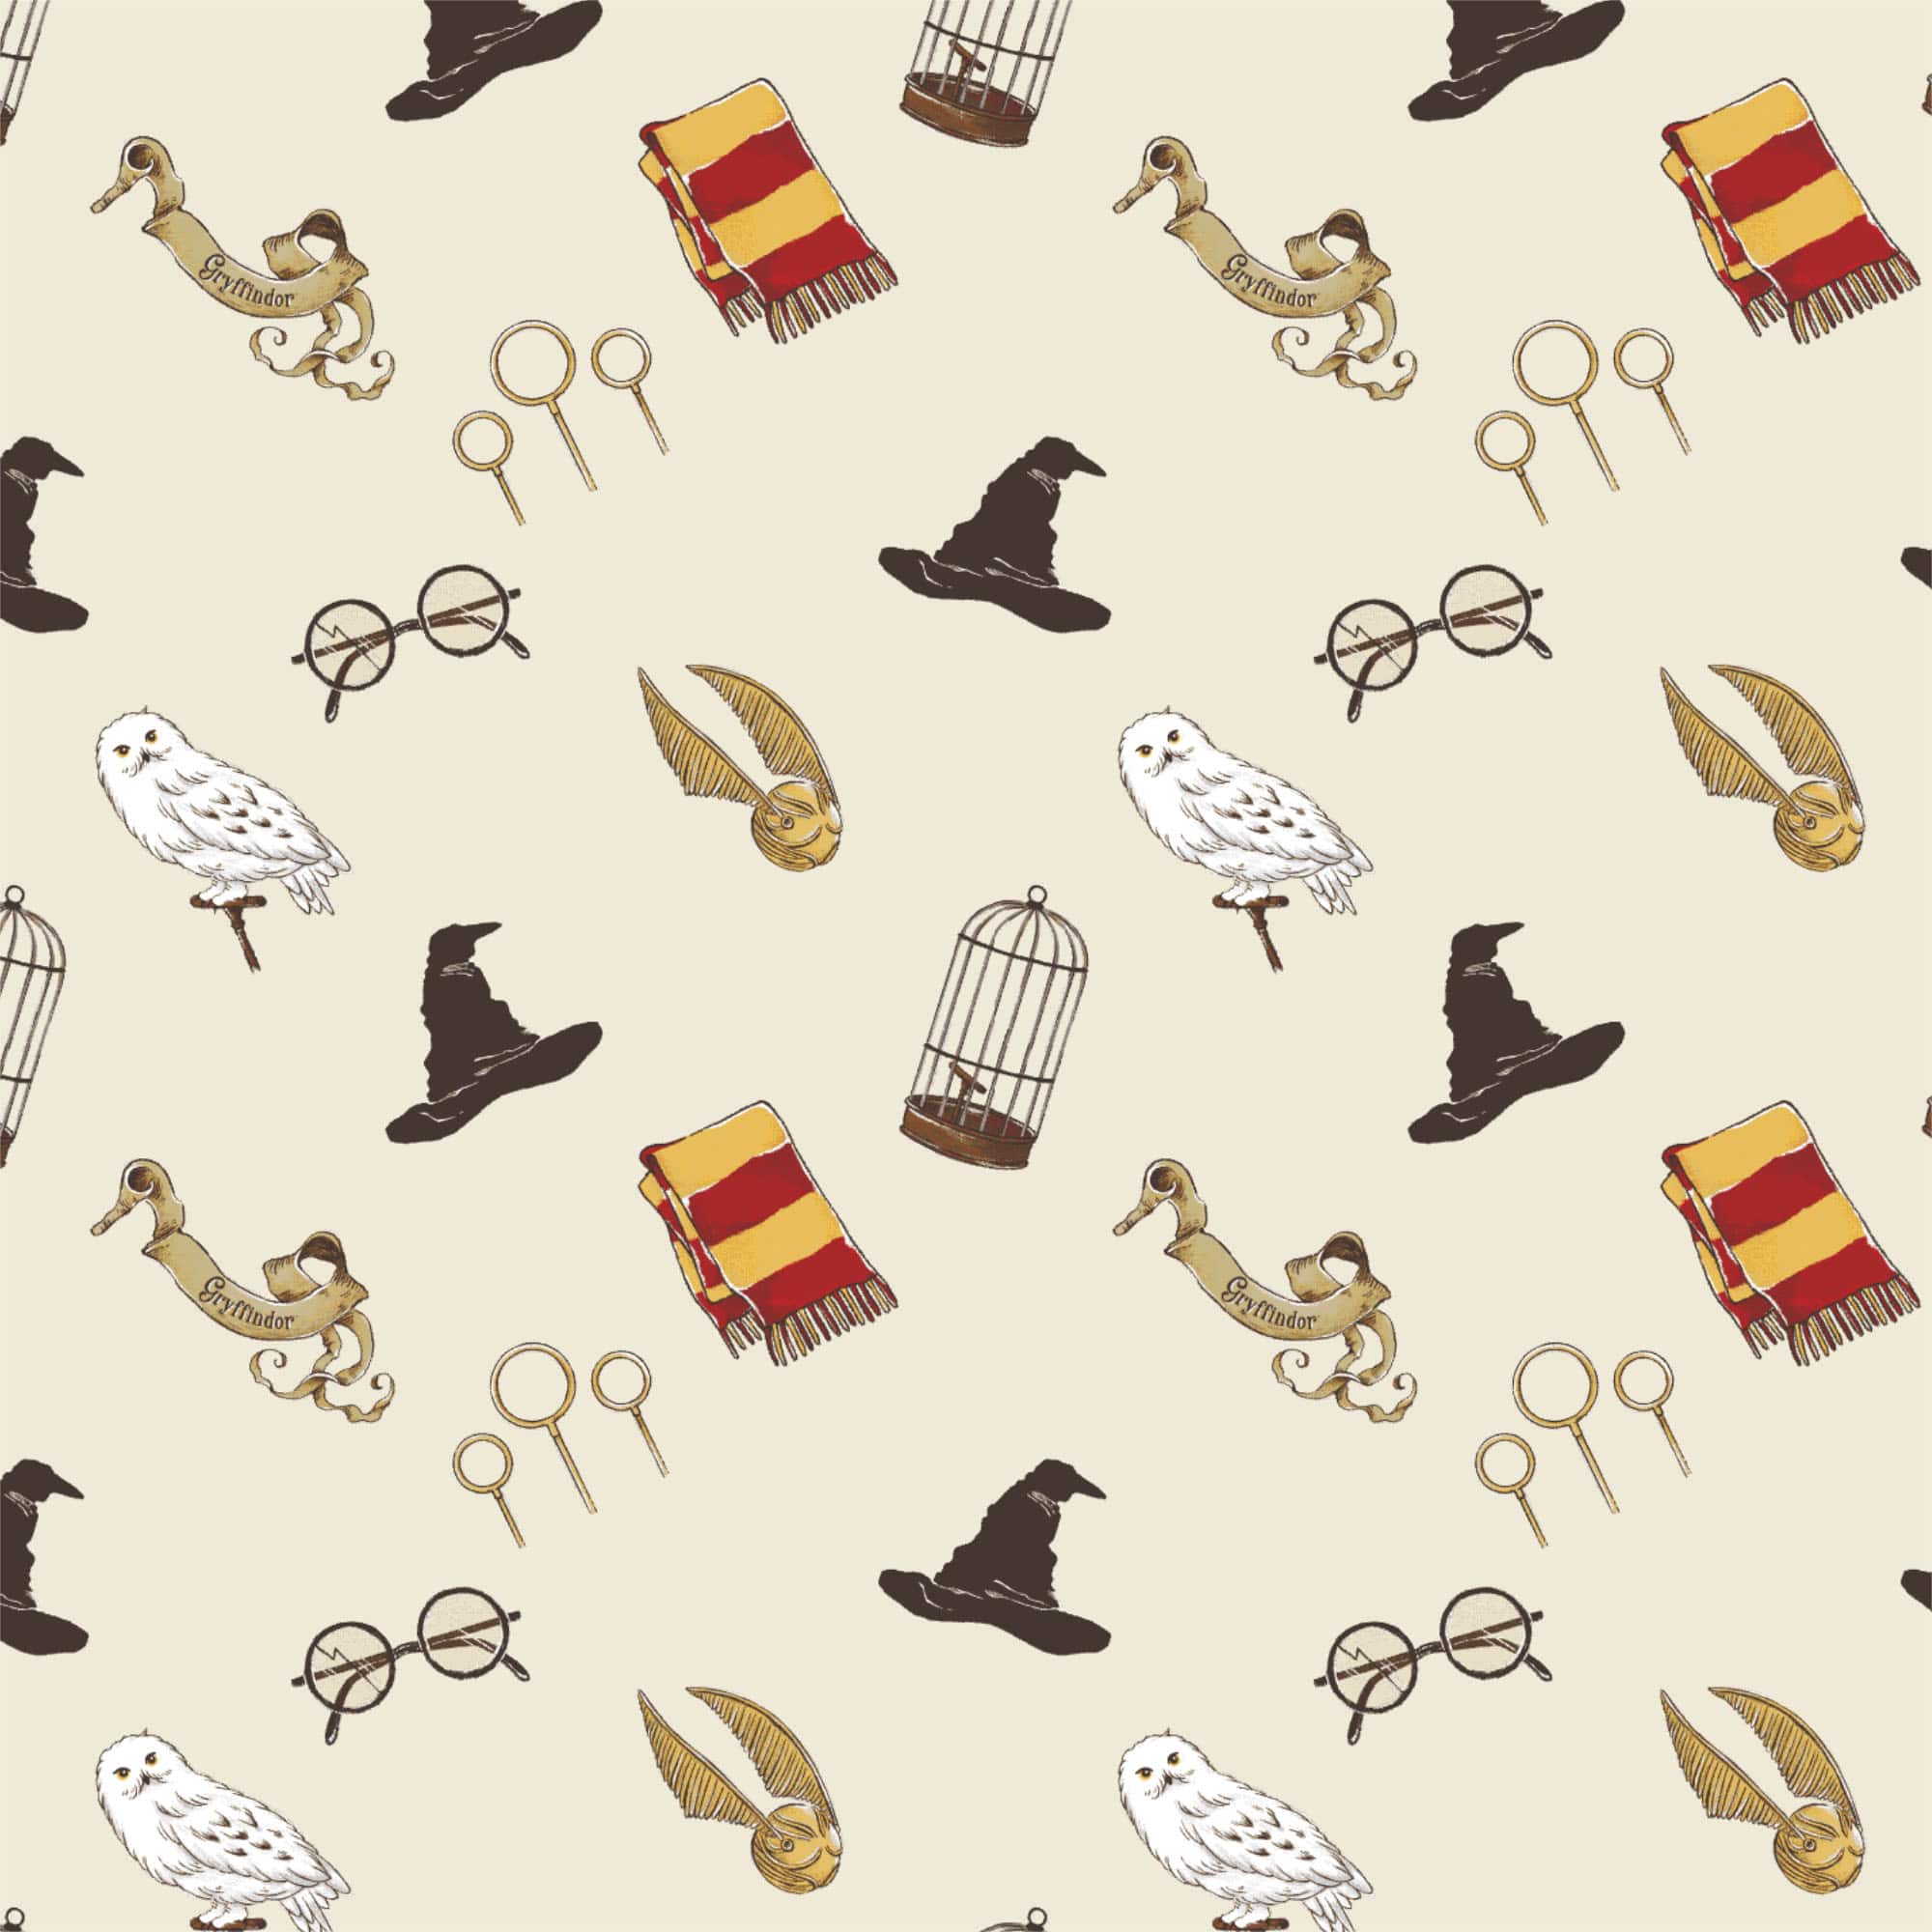 HARRY POTTER FABRIC LOGOS ALLOVER COTTON CAMELOT QUILTING MATERIAL   BY THE YARD 